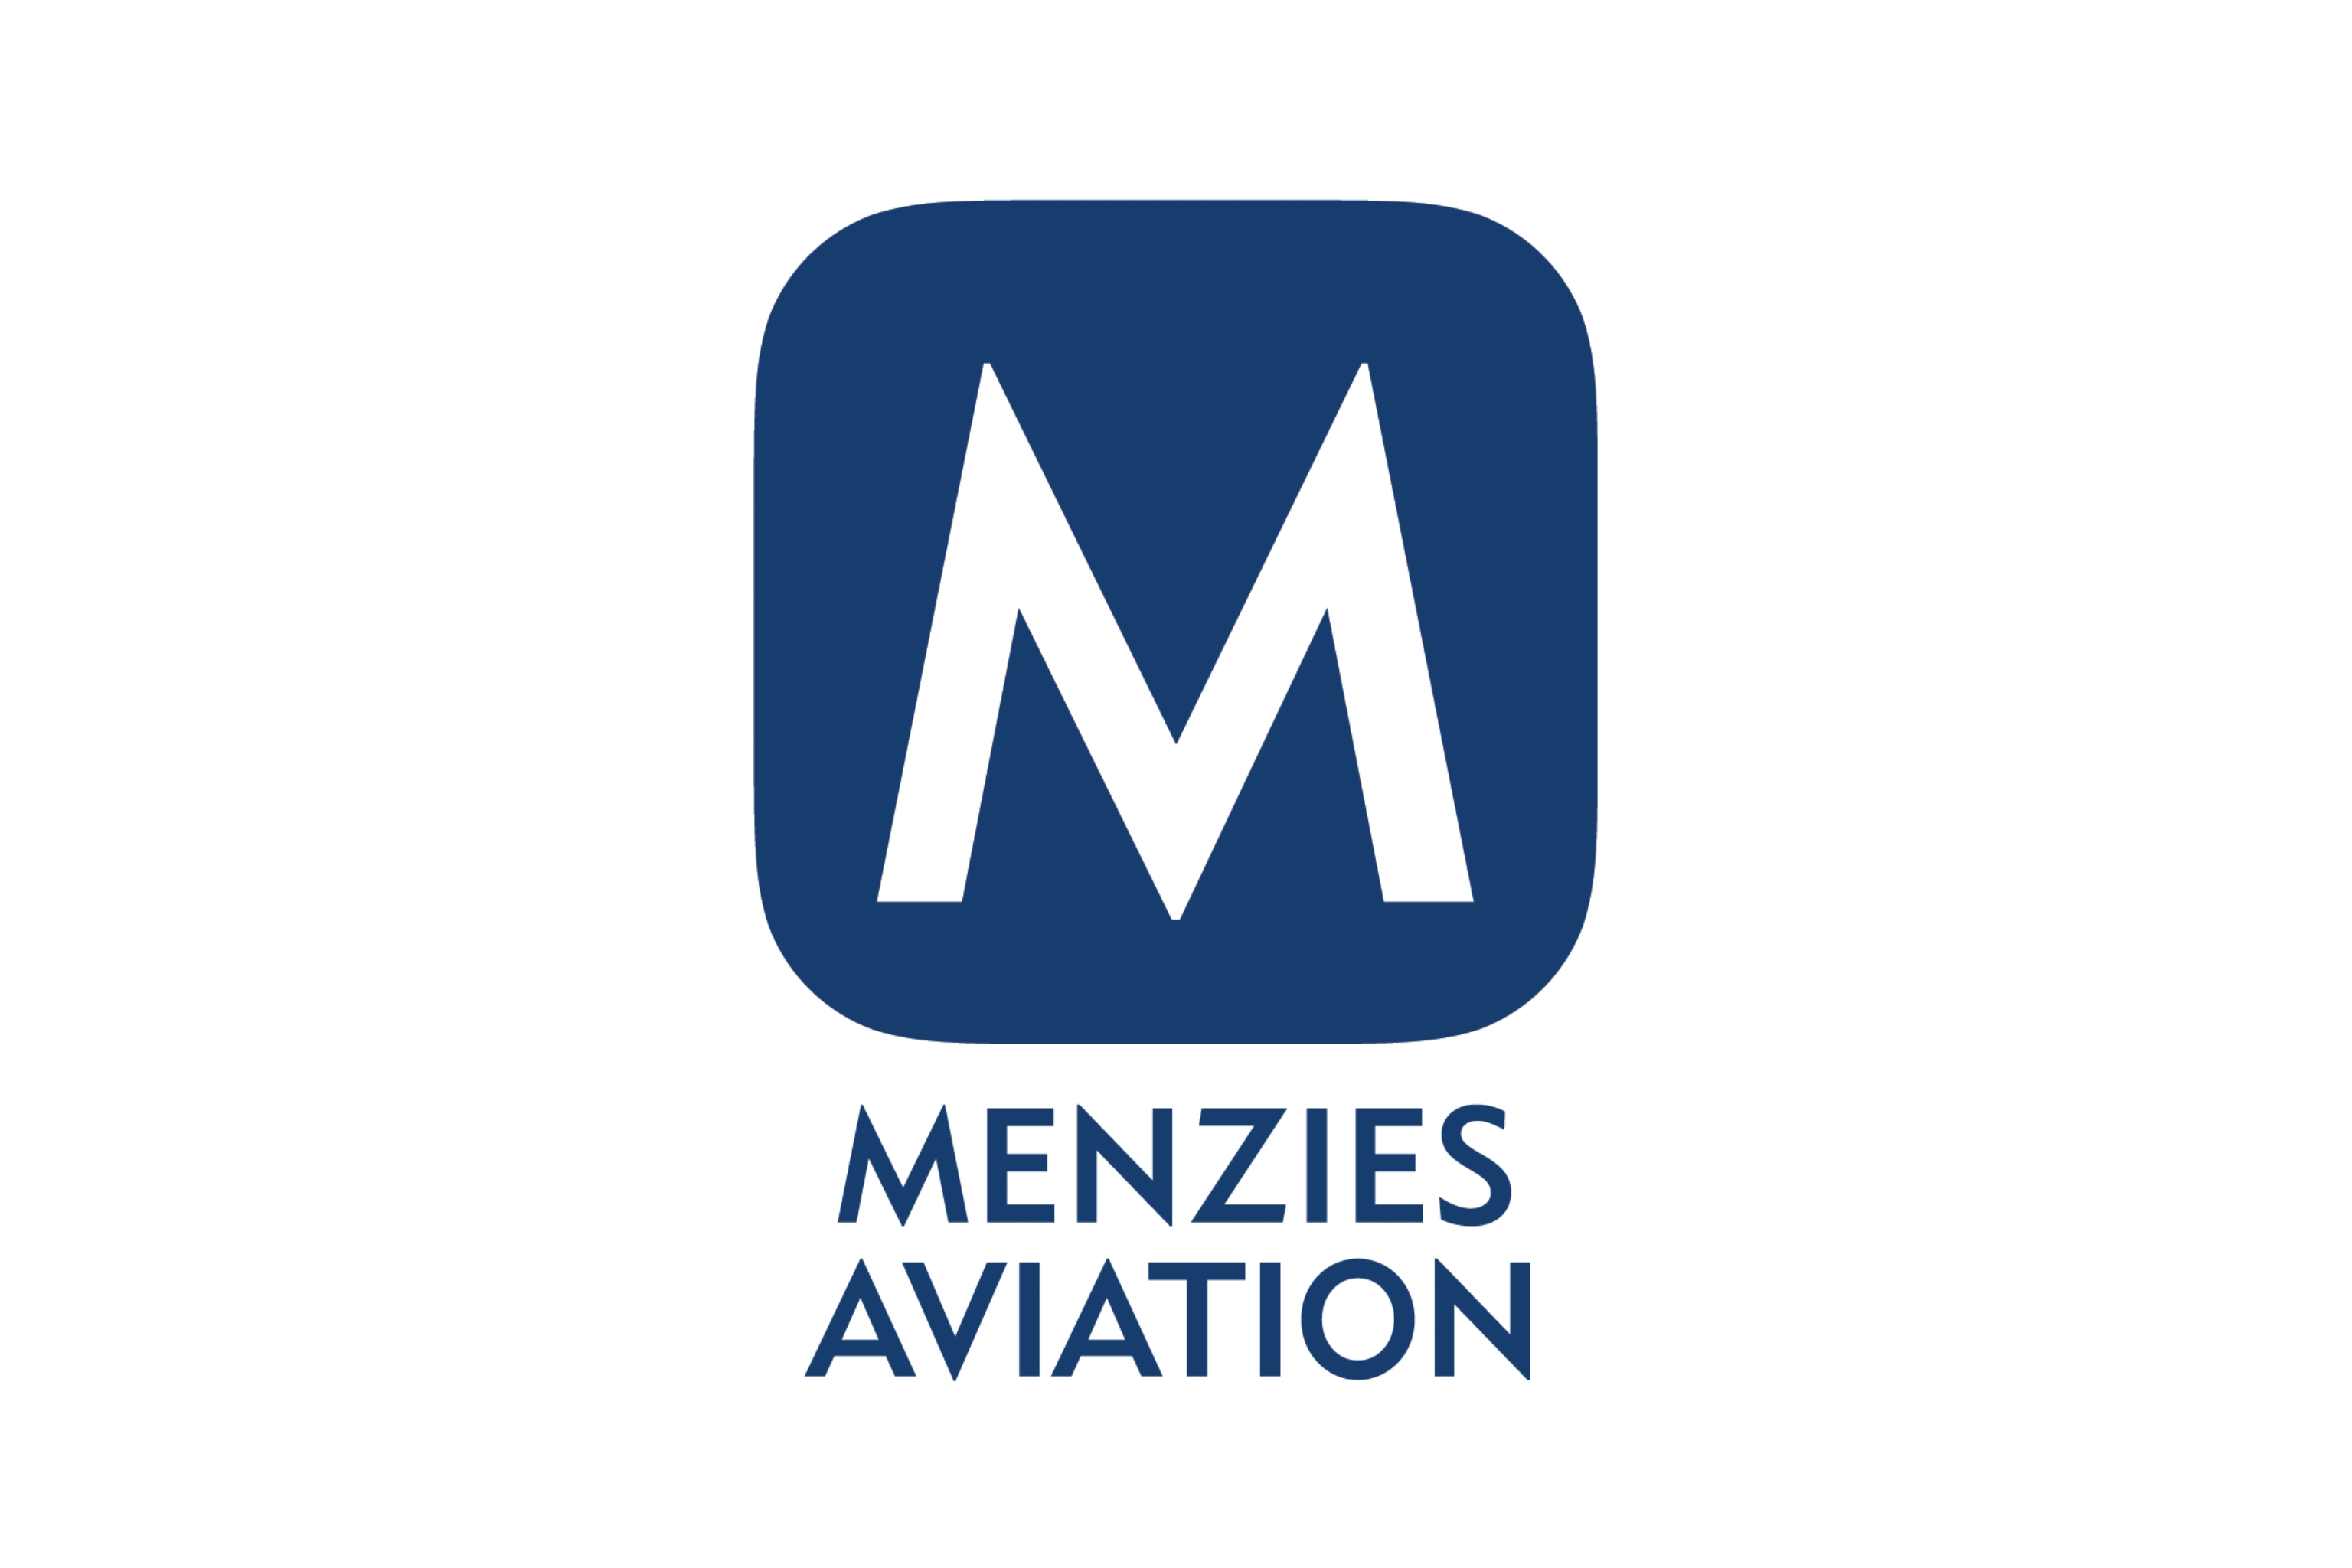 Welcome our newest member Menzies Aviation